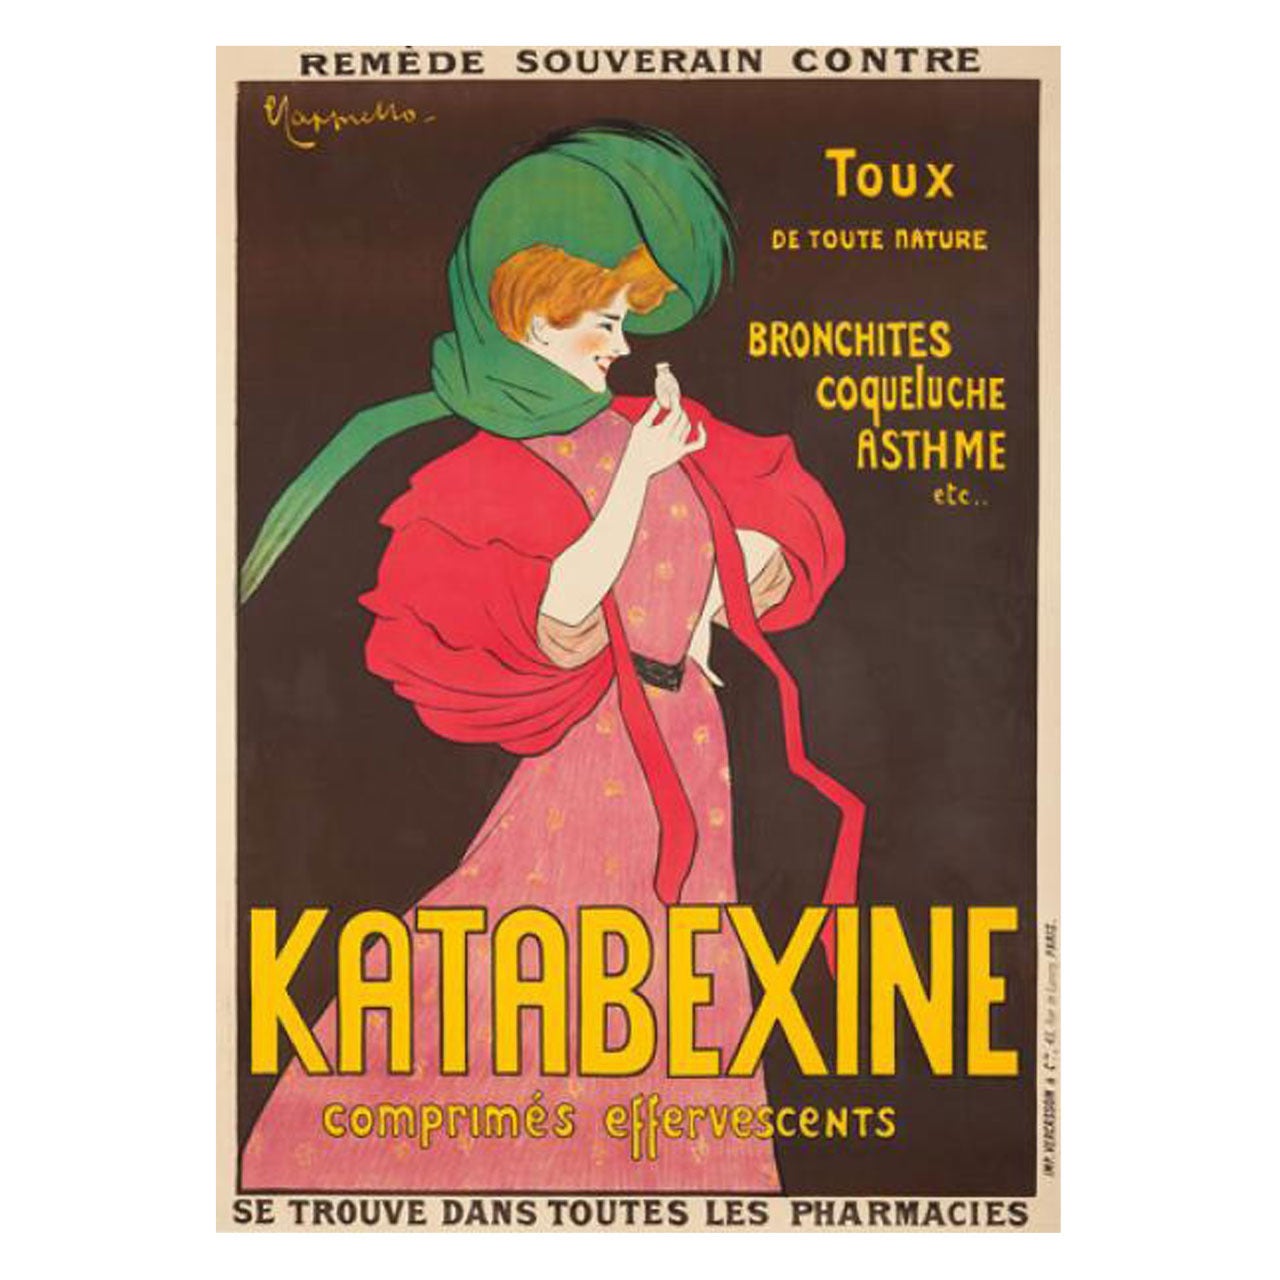 Original French Advertising Poster by Cappiello